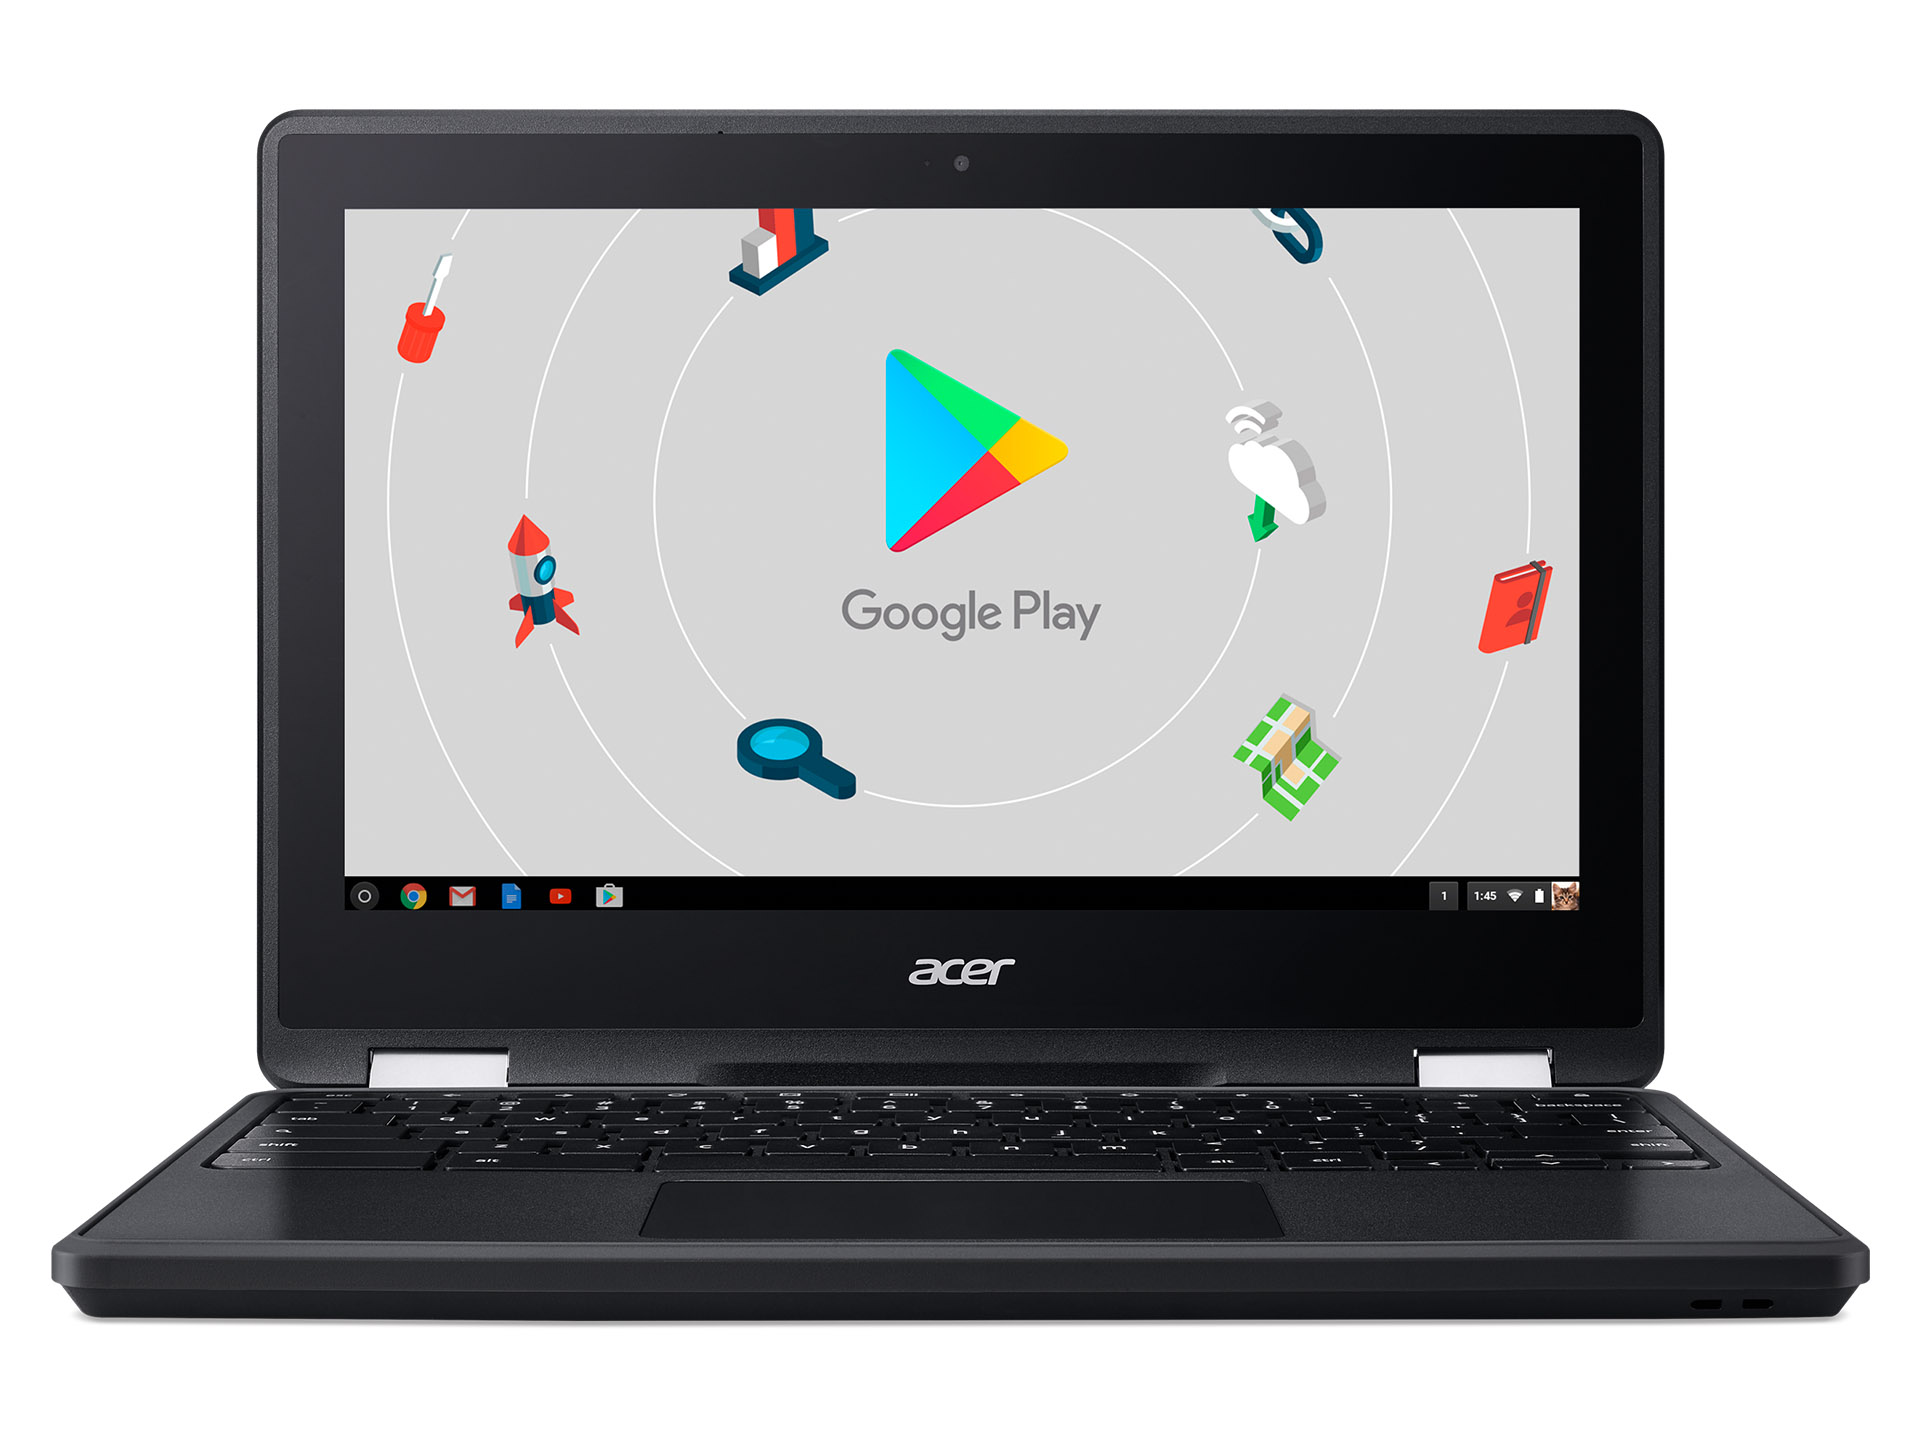 Chromebook Spin 11 - Features ksp 04 - Large